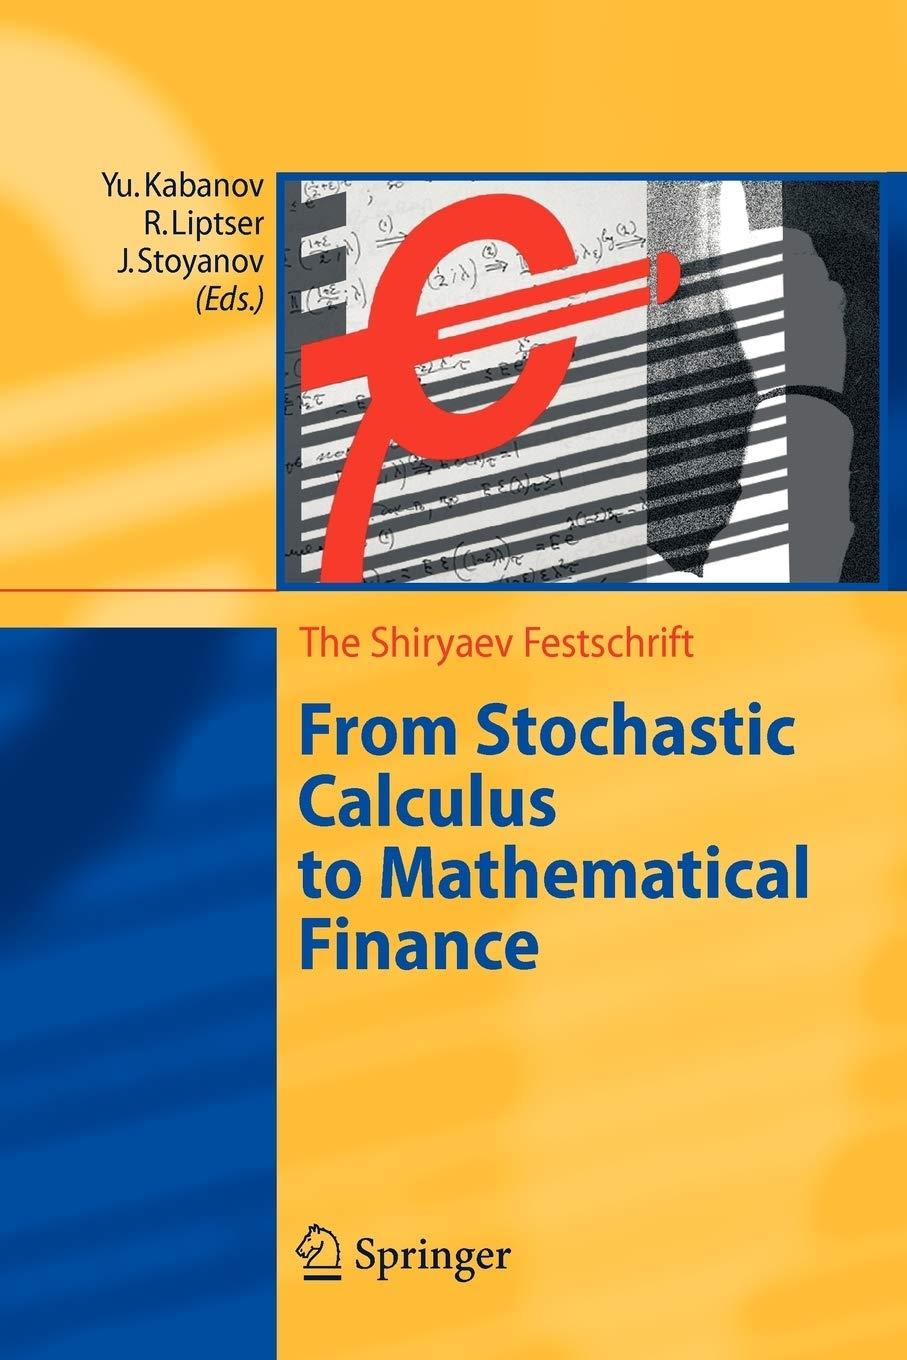 from stochastic calculus to mathematical finance the shiryaev festschrift 1st edition yu. kabanov, r.